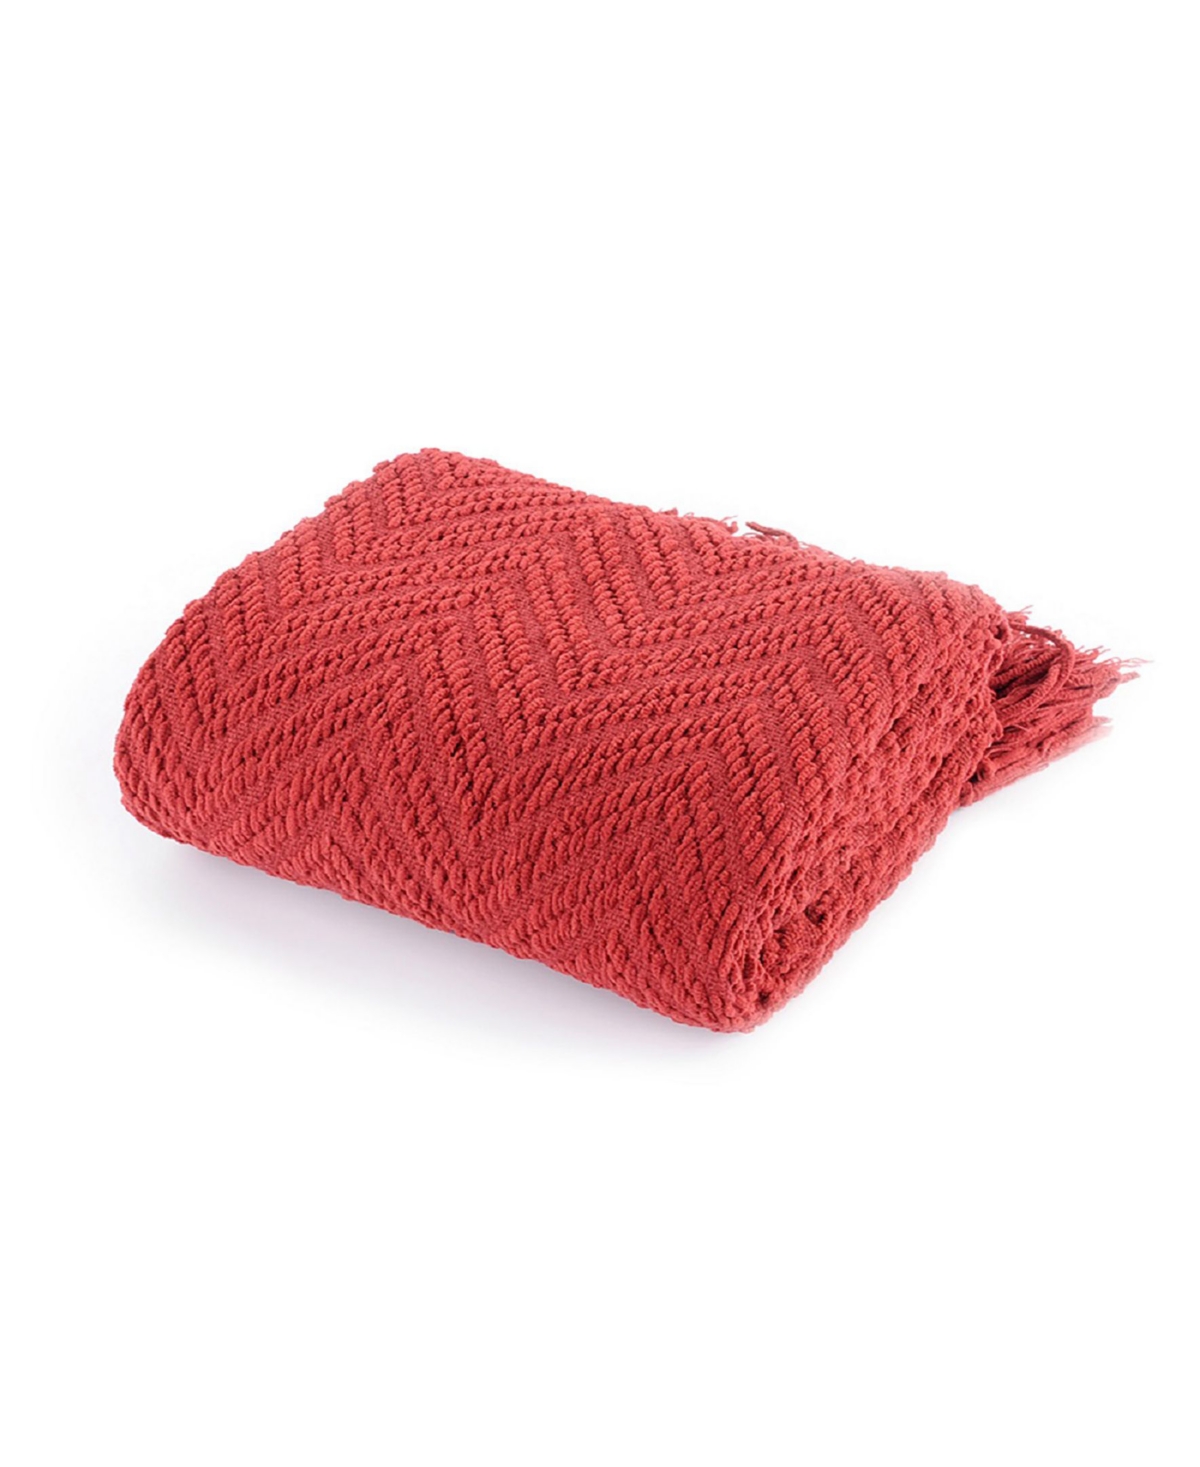 Battilo Knit Zig Zag Textured Woven Micro Chenille Throw, Extra Large In Red